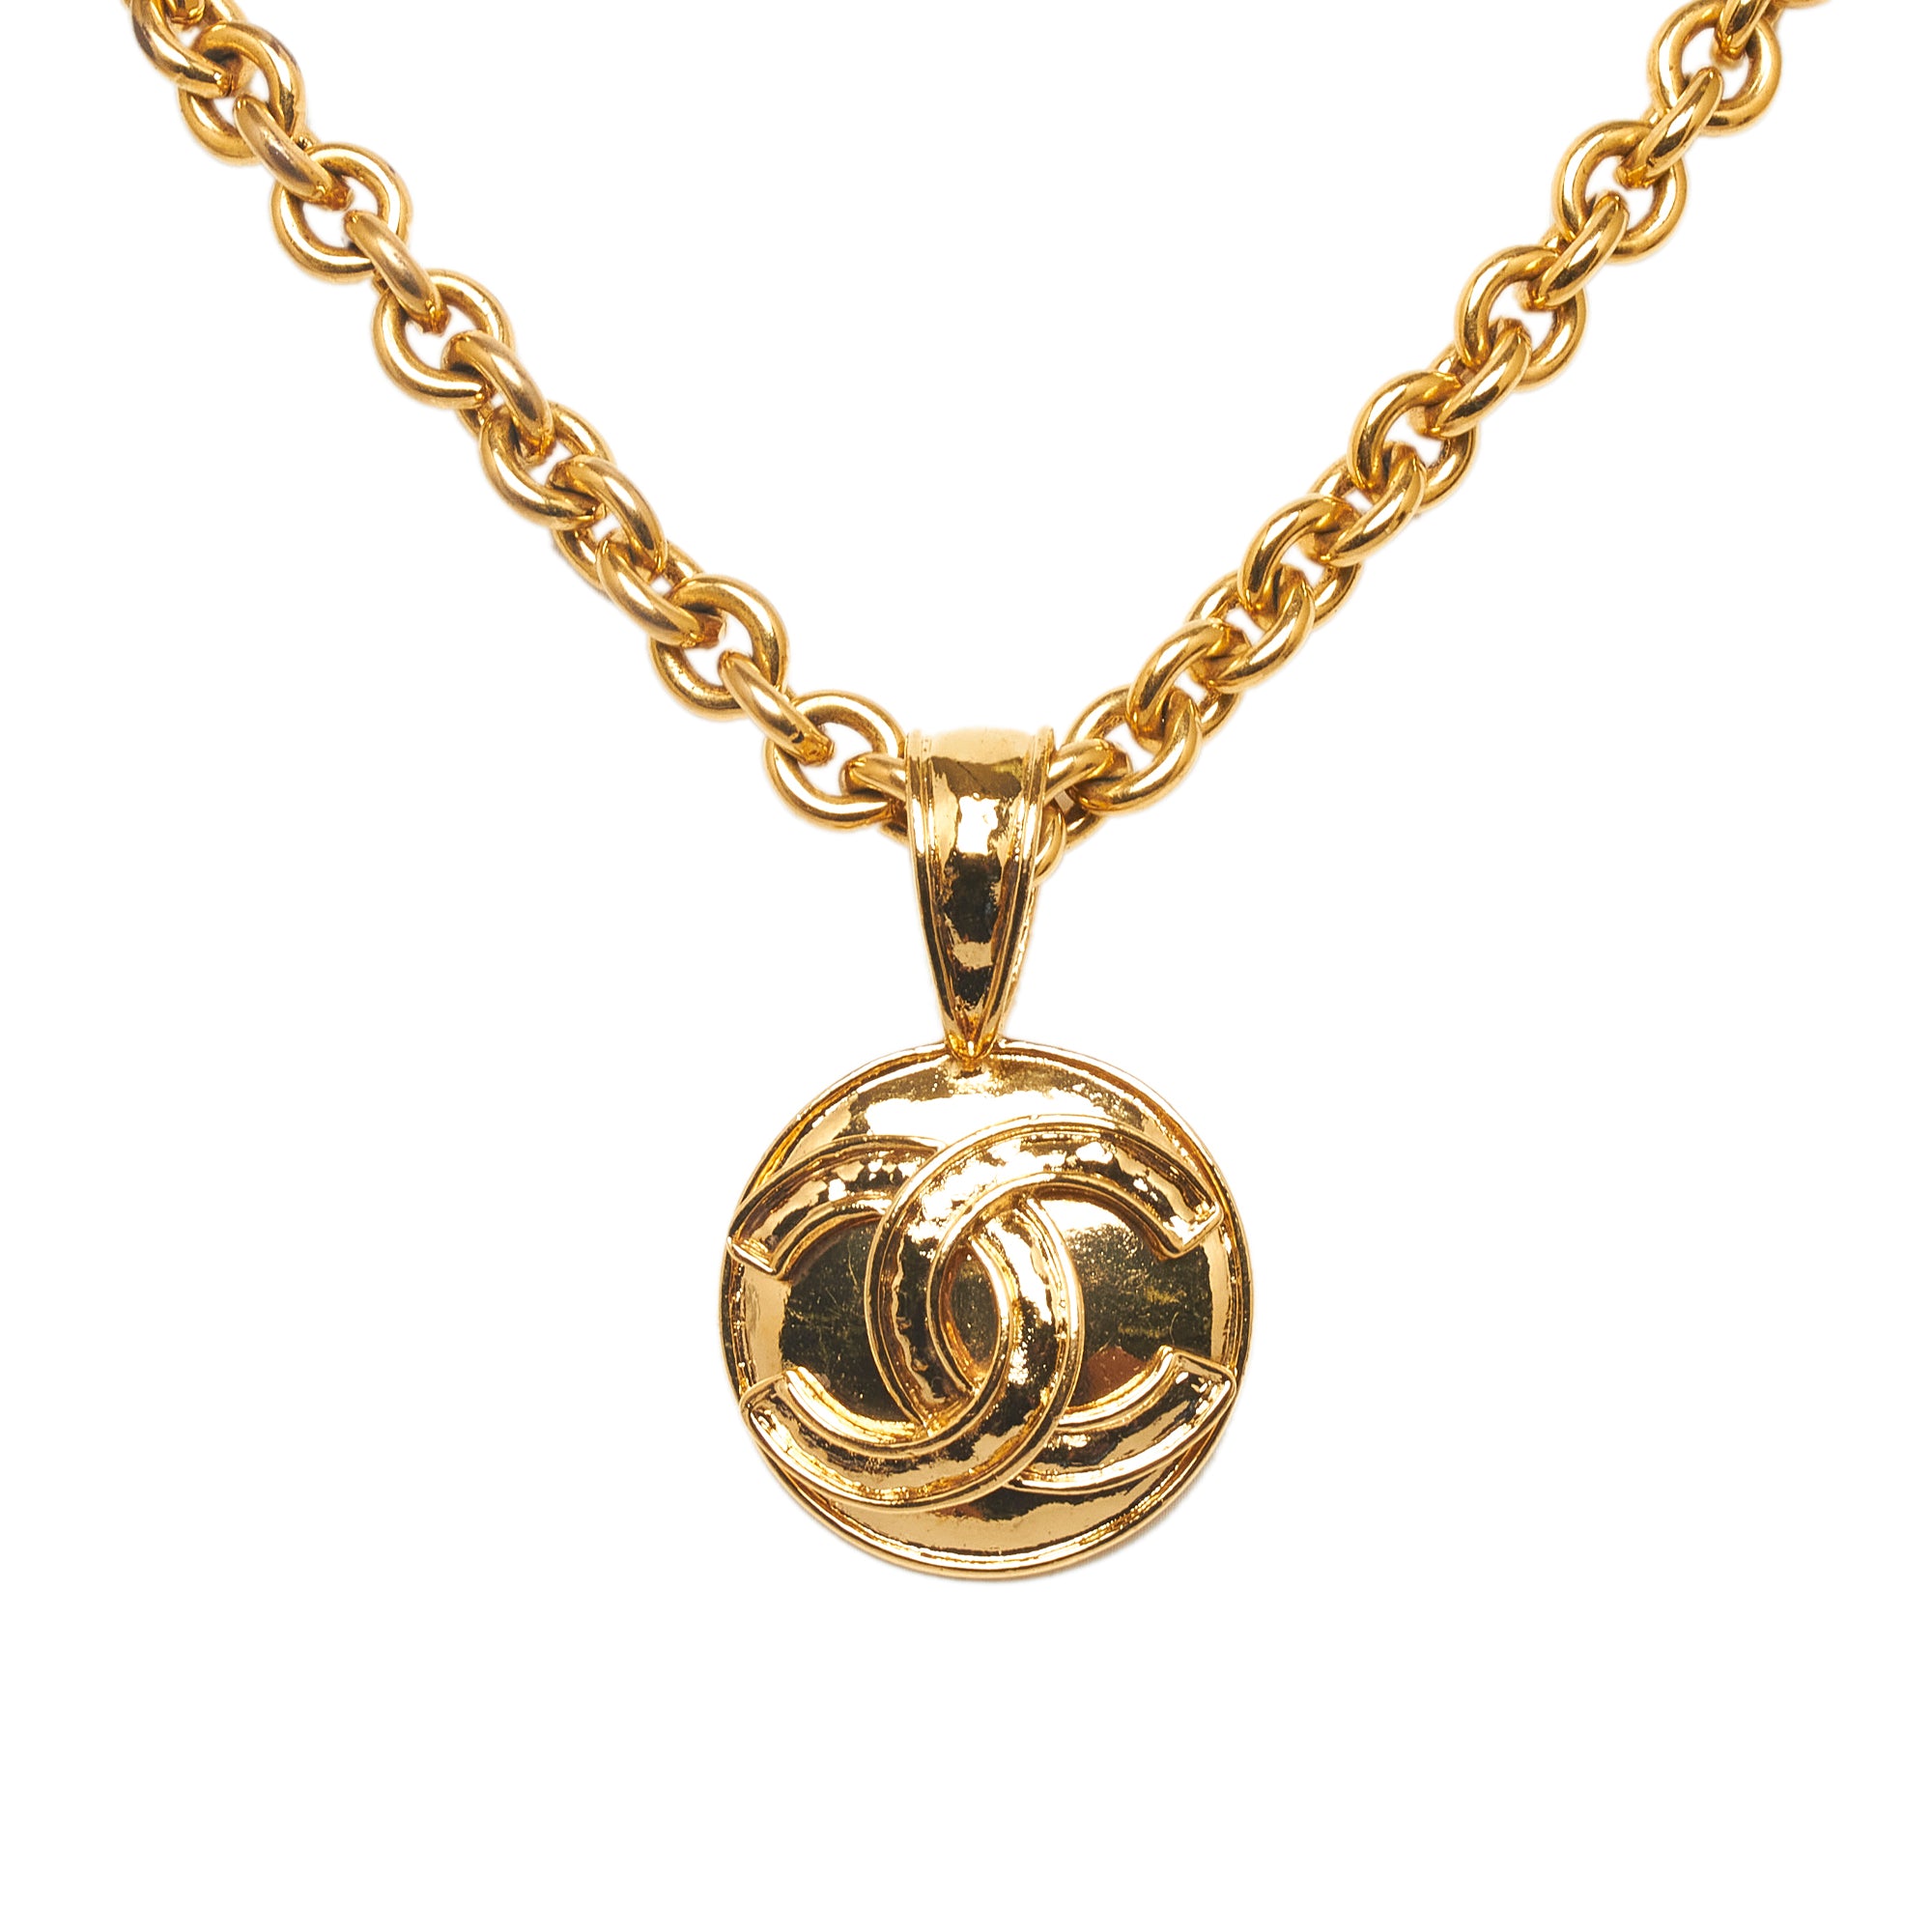 Channel Gold Metal Ring Chain Necklace or Belt with CC Medallion – QUEEN MAY